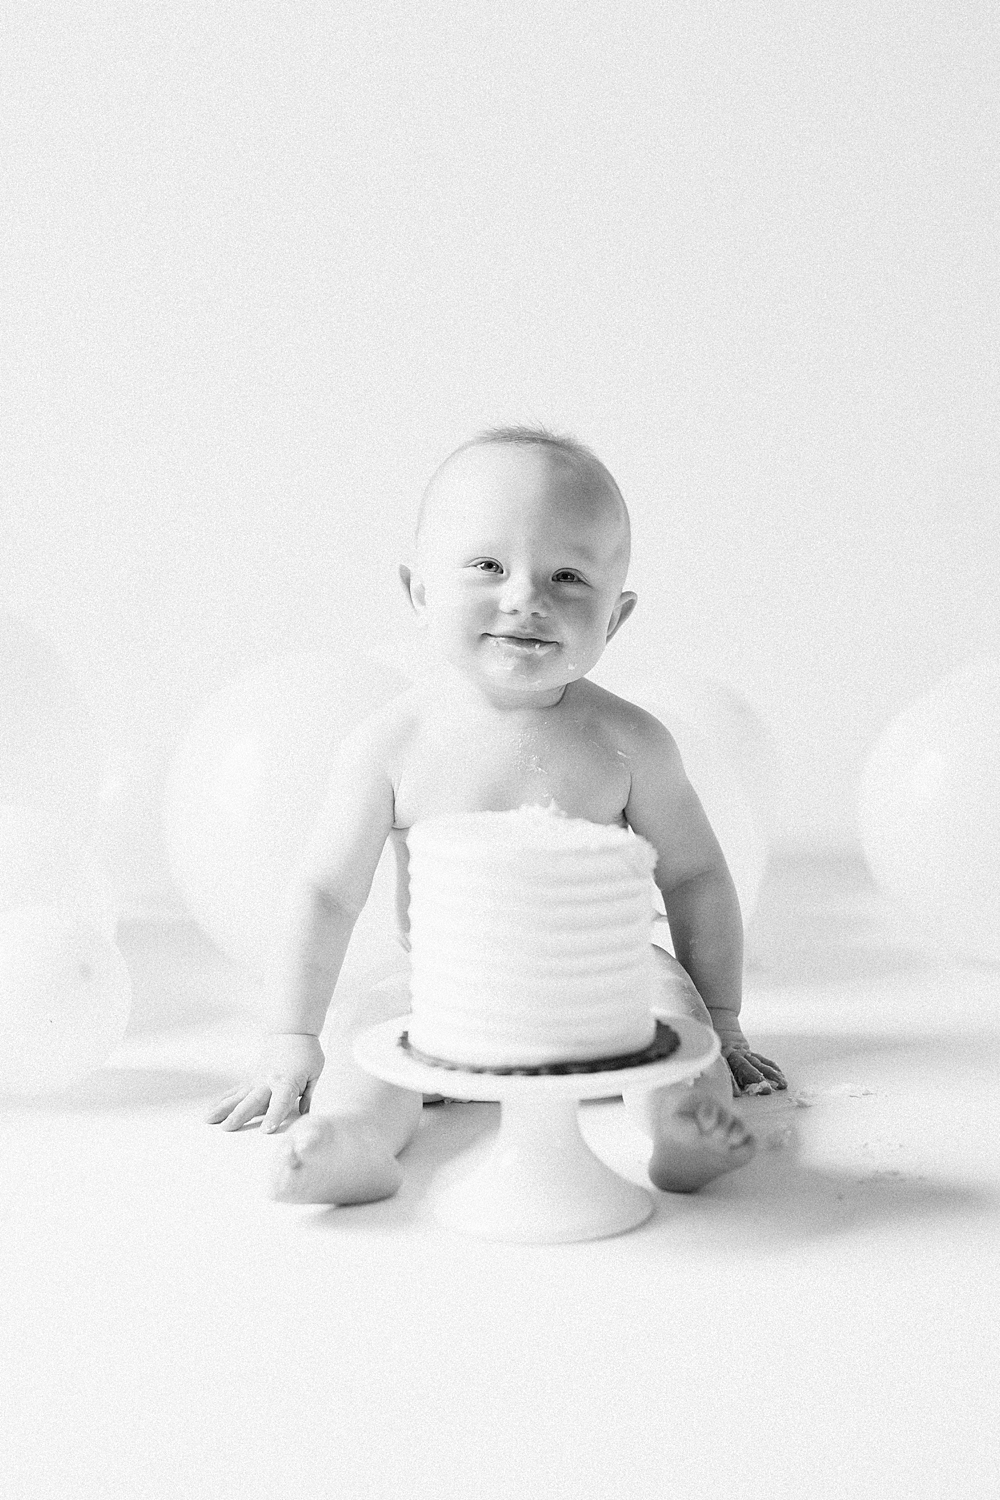 How to Prepare for a Cake Smash Photo Session with Truly Photography